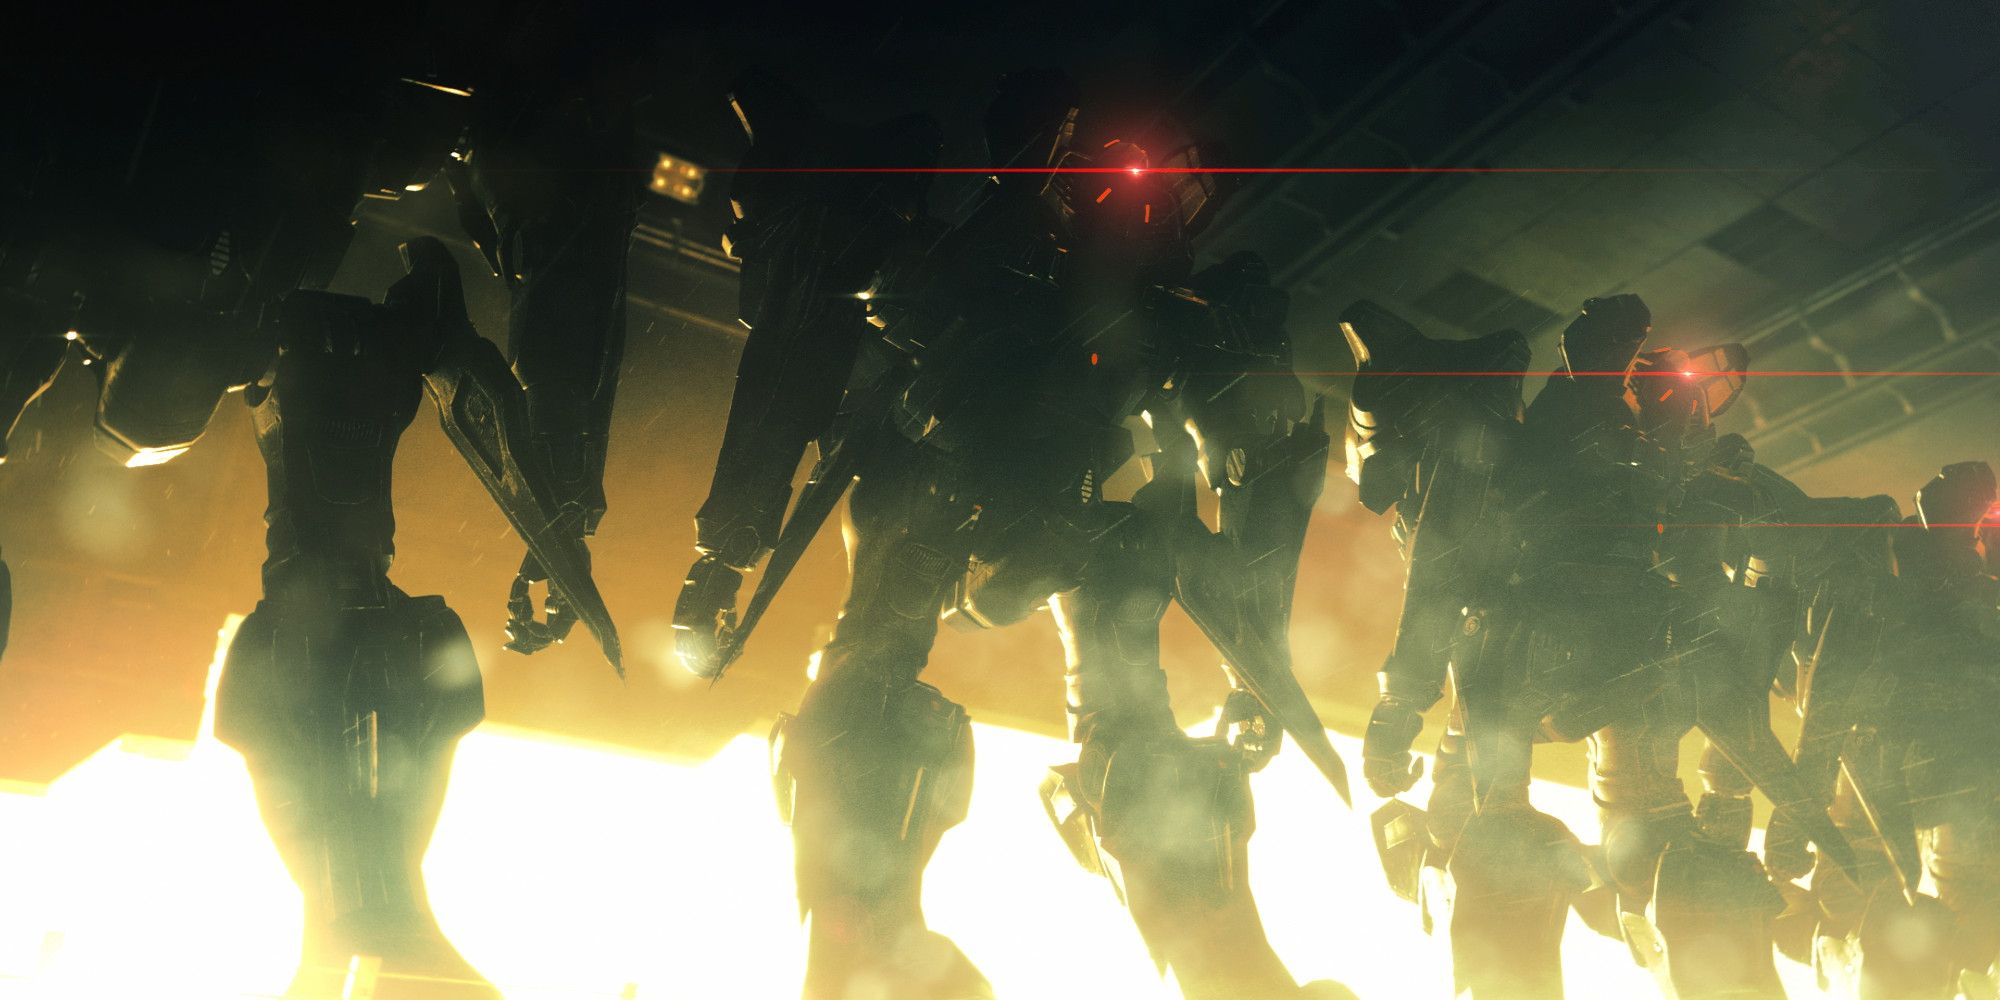 A row of mechs from the reveal trailer for Armored Core 6